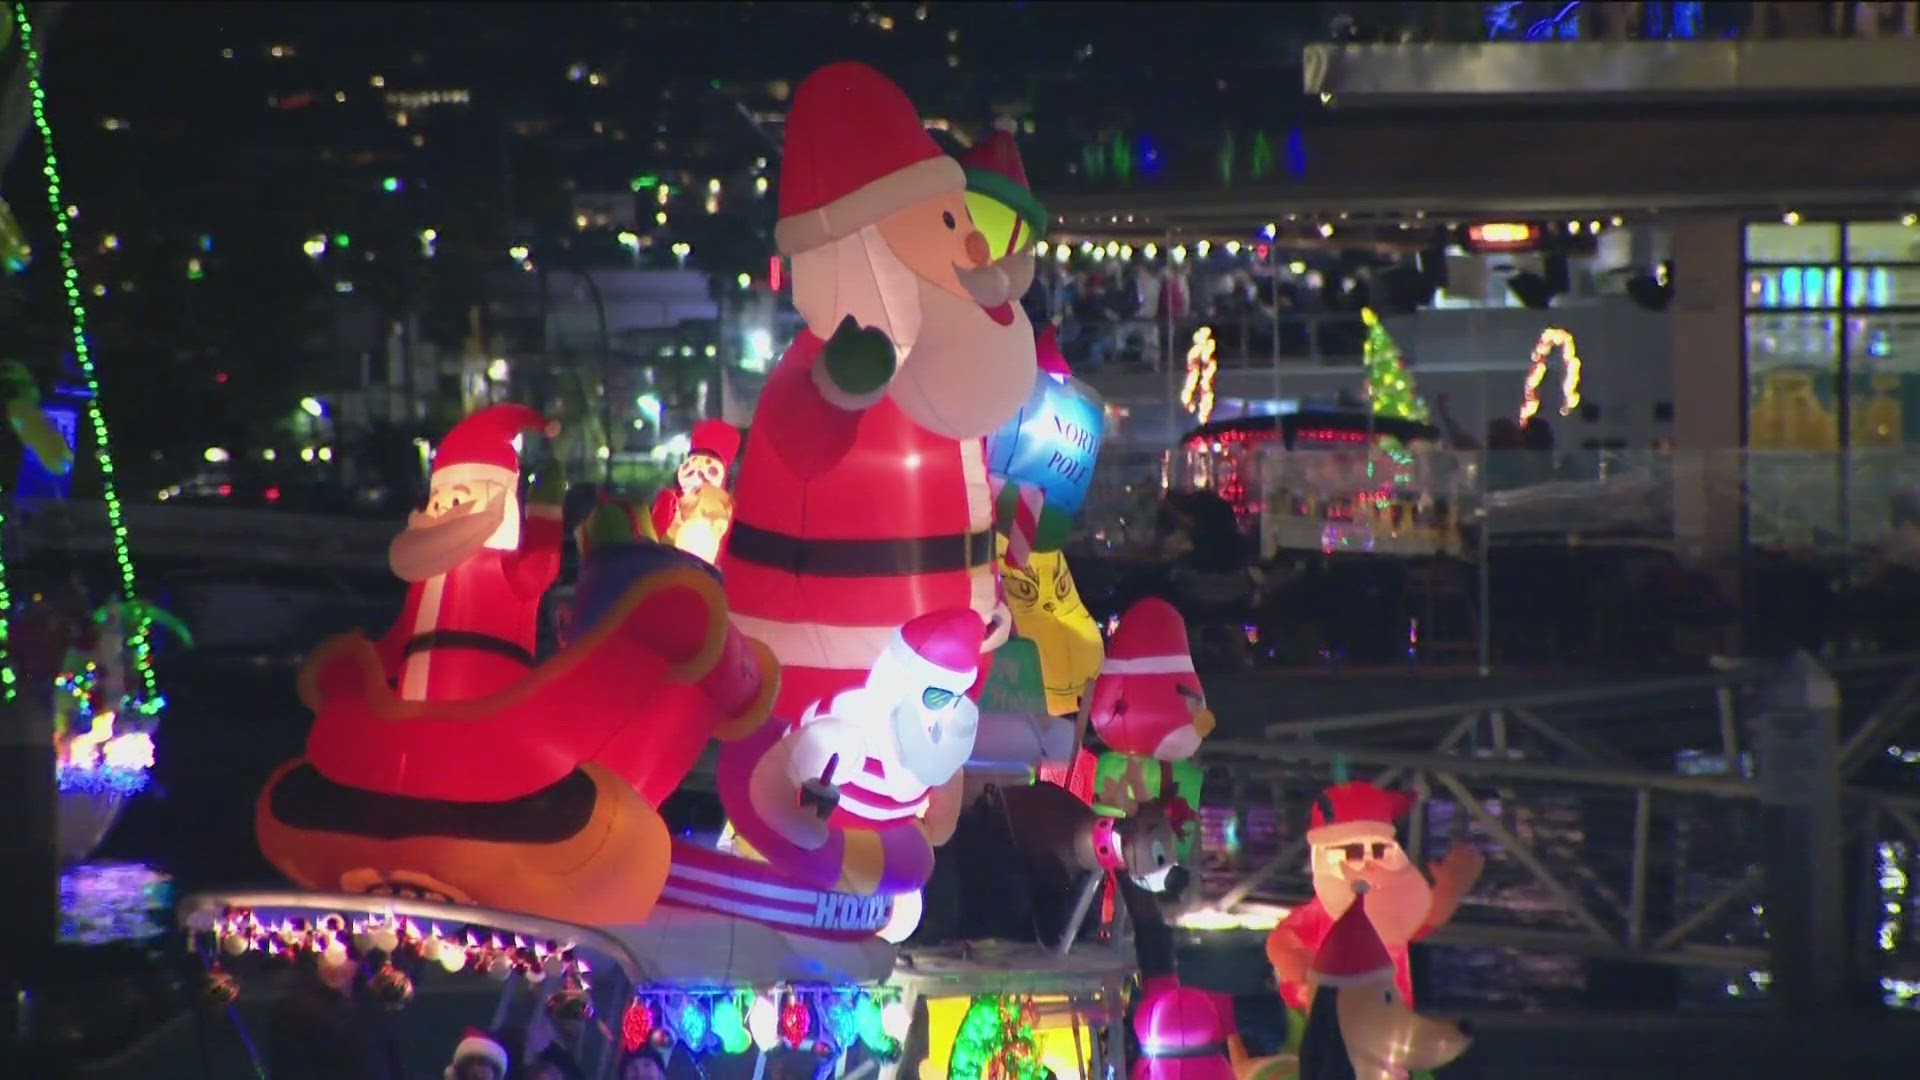 The time-honored tradition is back! The San Diego Bay Parade of Lights promises to entertain and enthrall audiences during events on December 10 and 17.